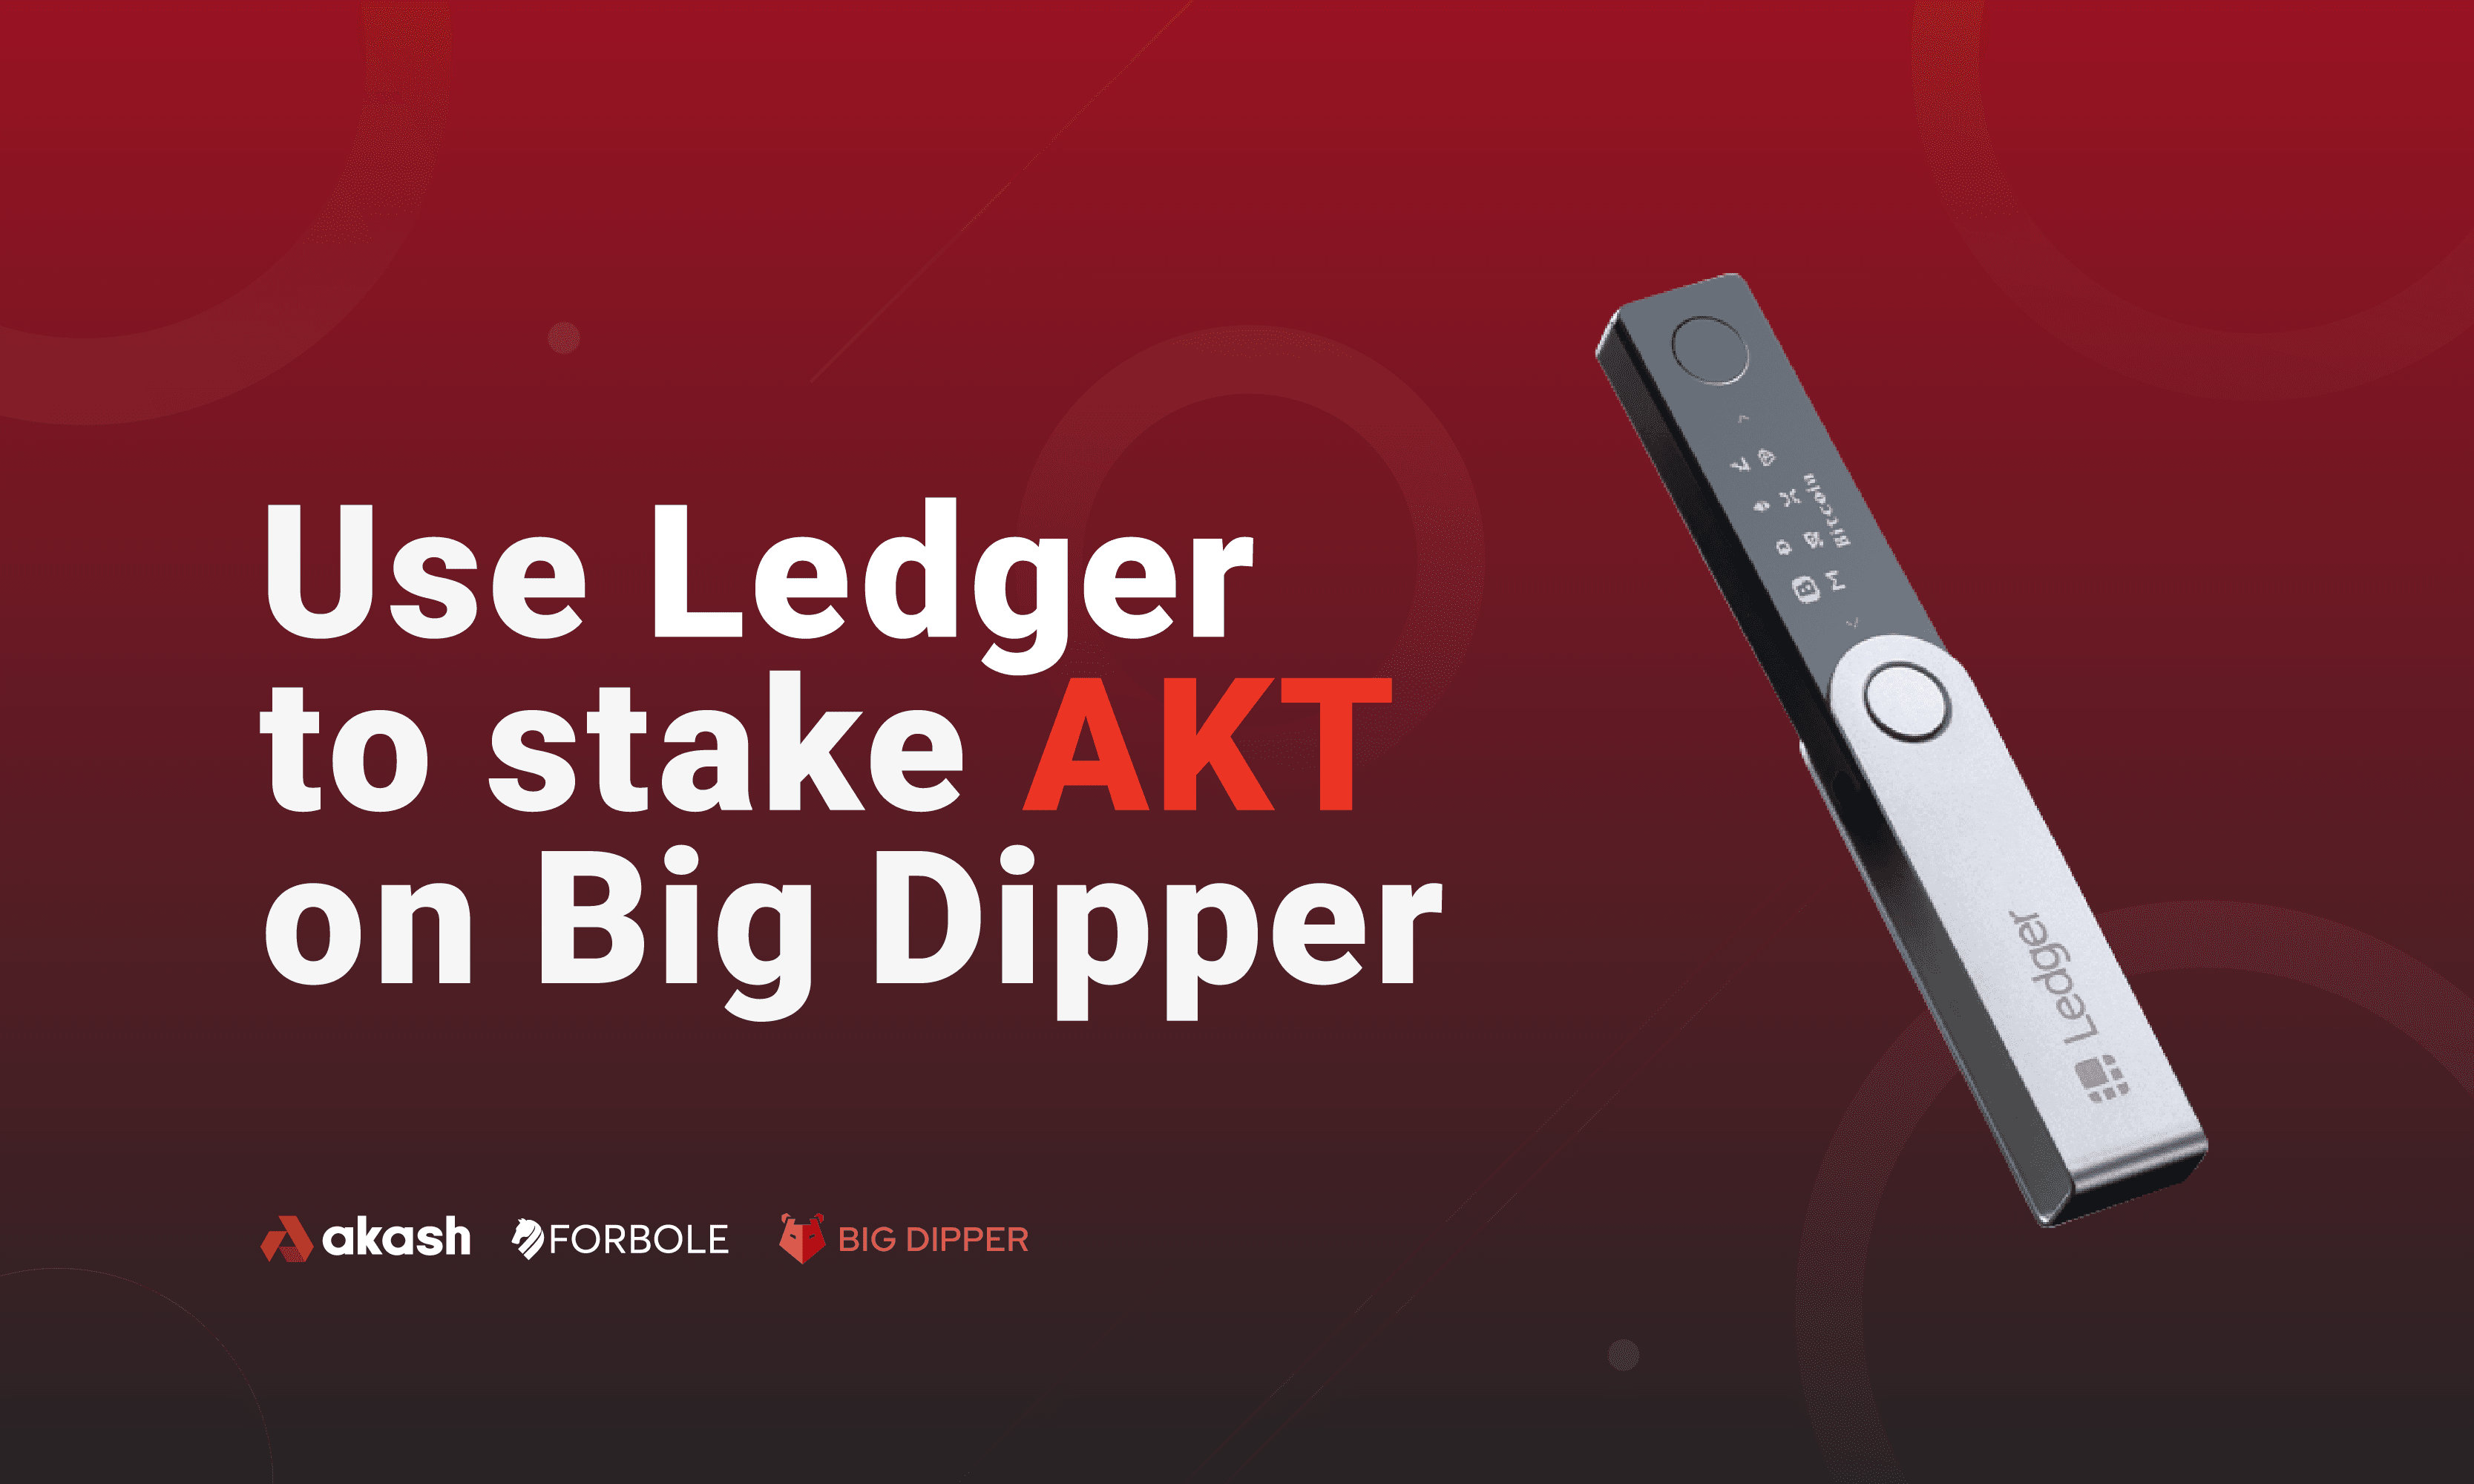 Use Ledger to stake AKT on Big Dipper